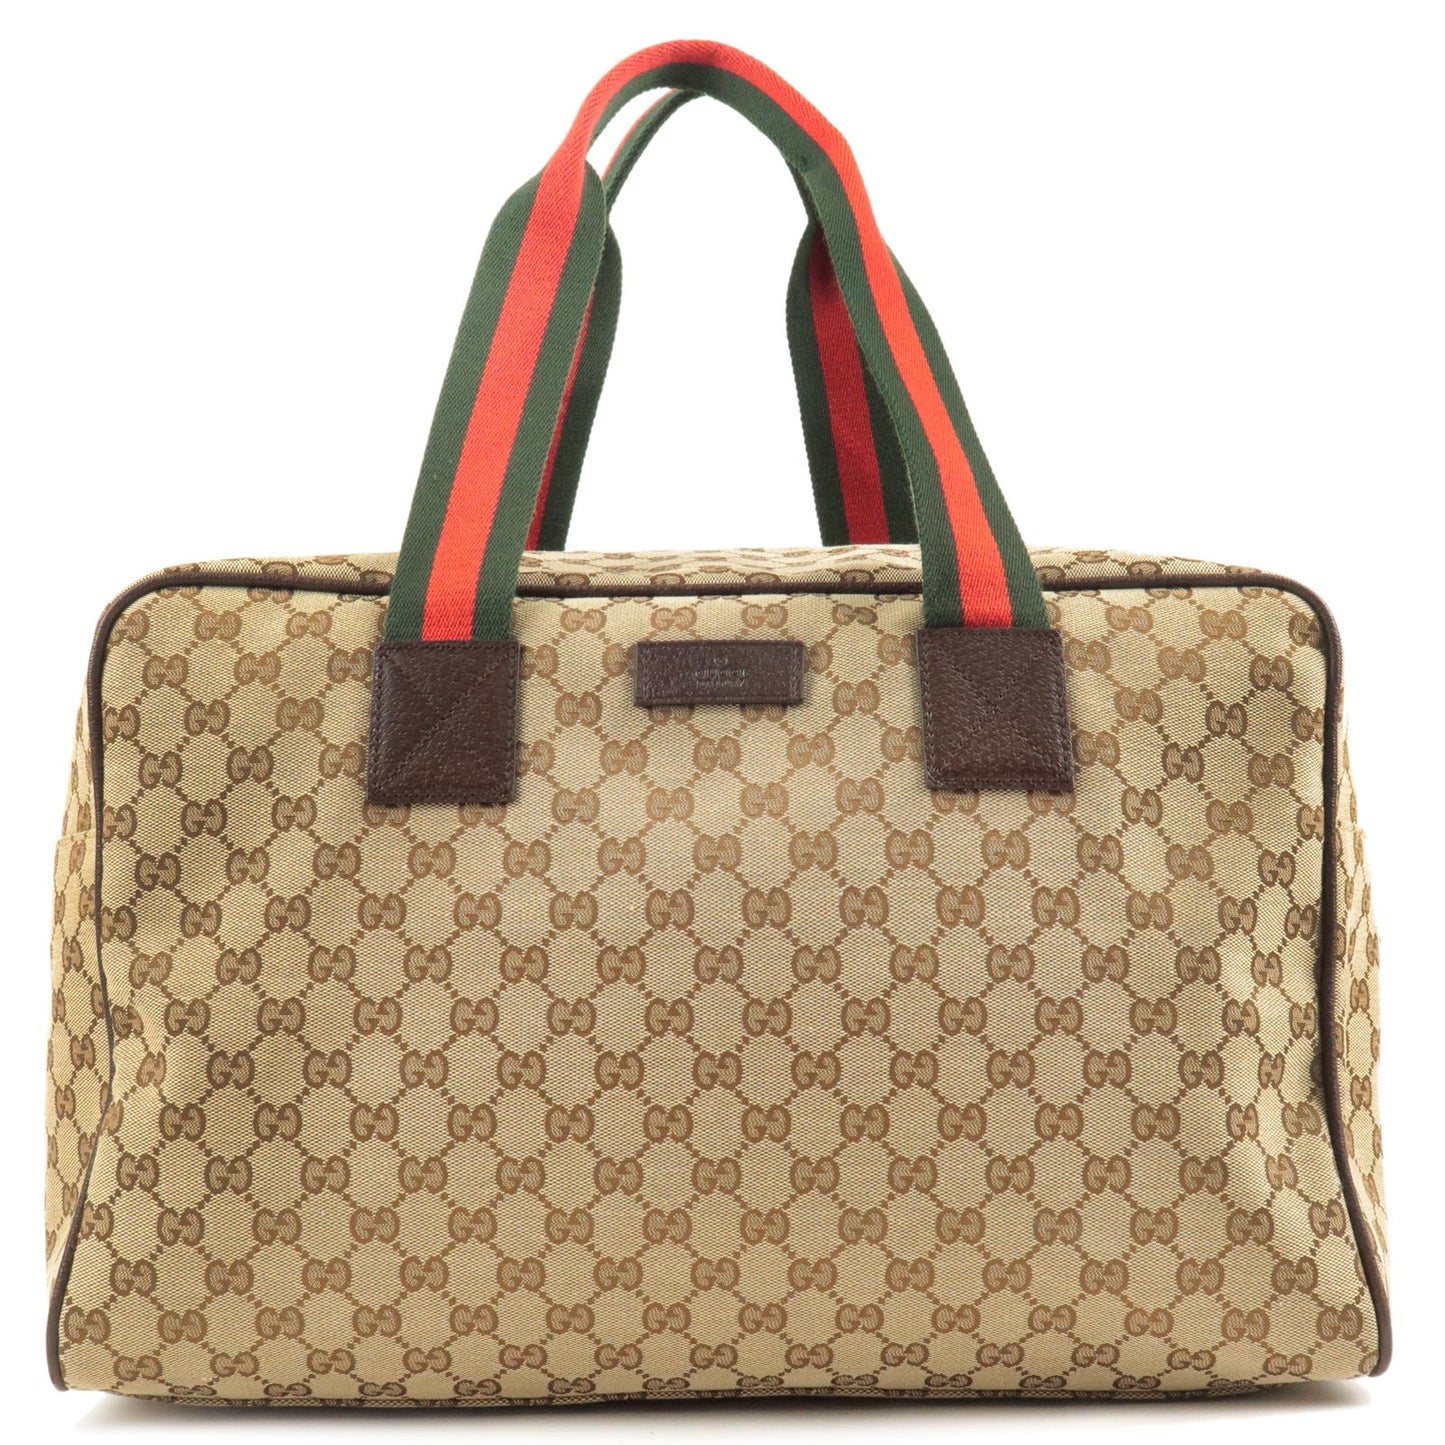 GUCCI-Sherry-Line-GG-Canvas-Leather-Boston-Bag-Beige-153240